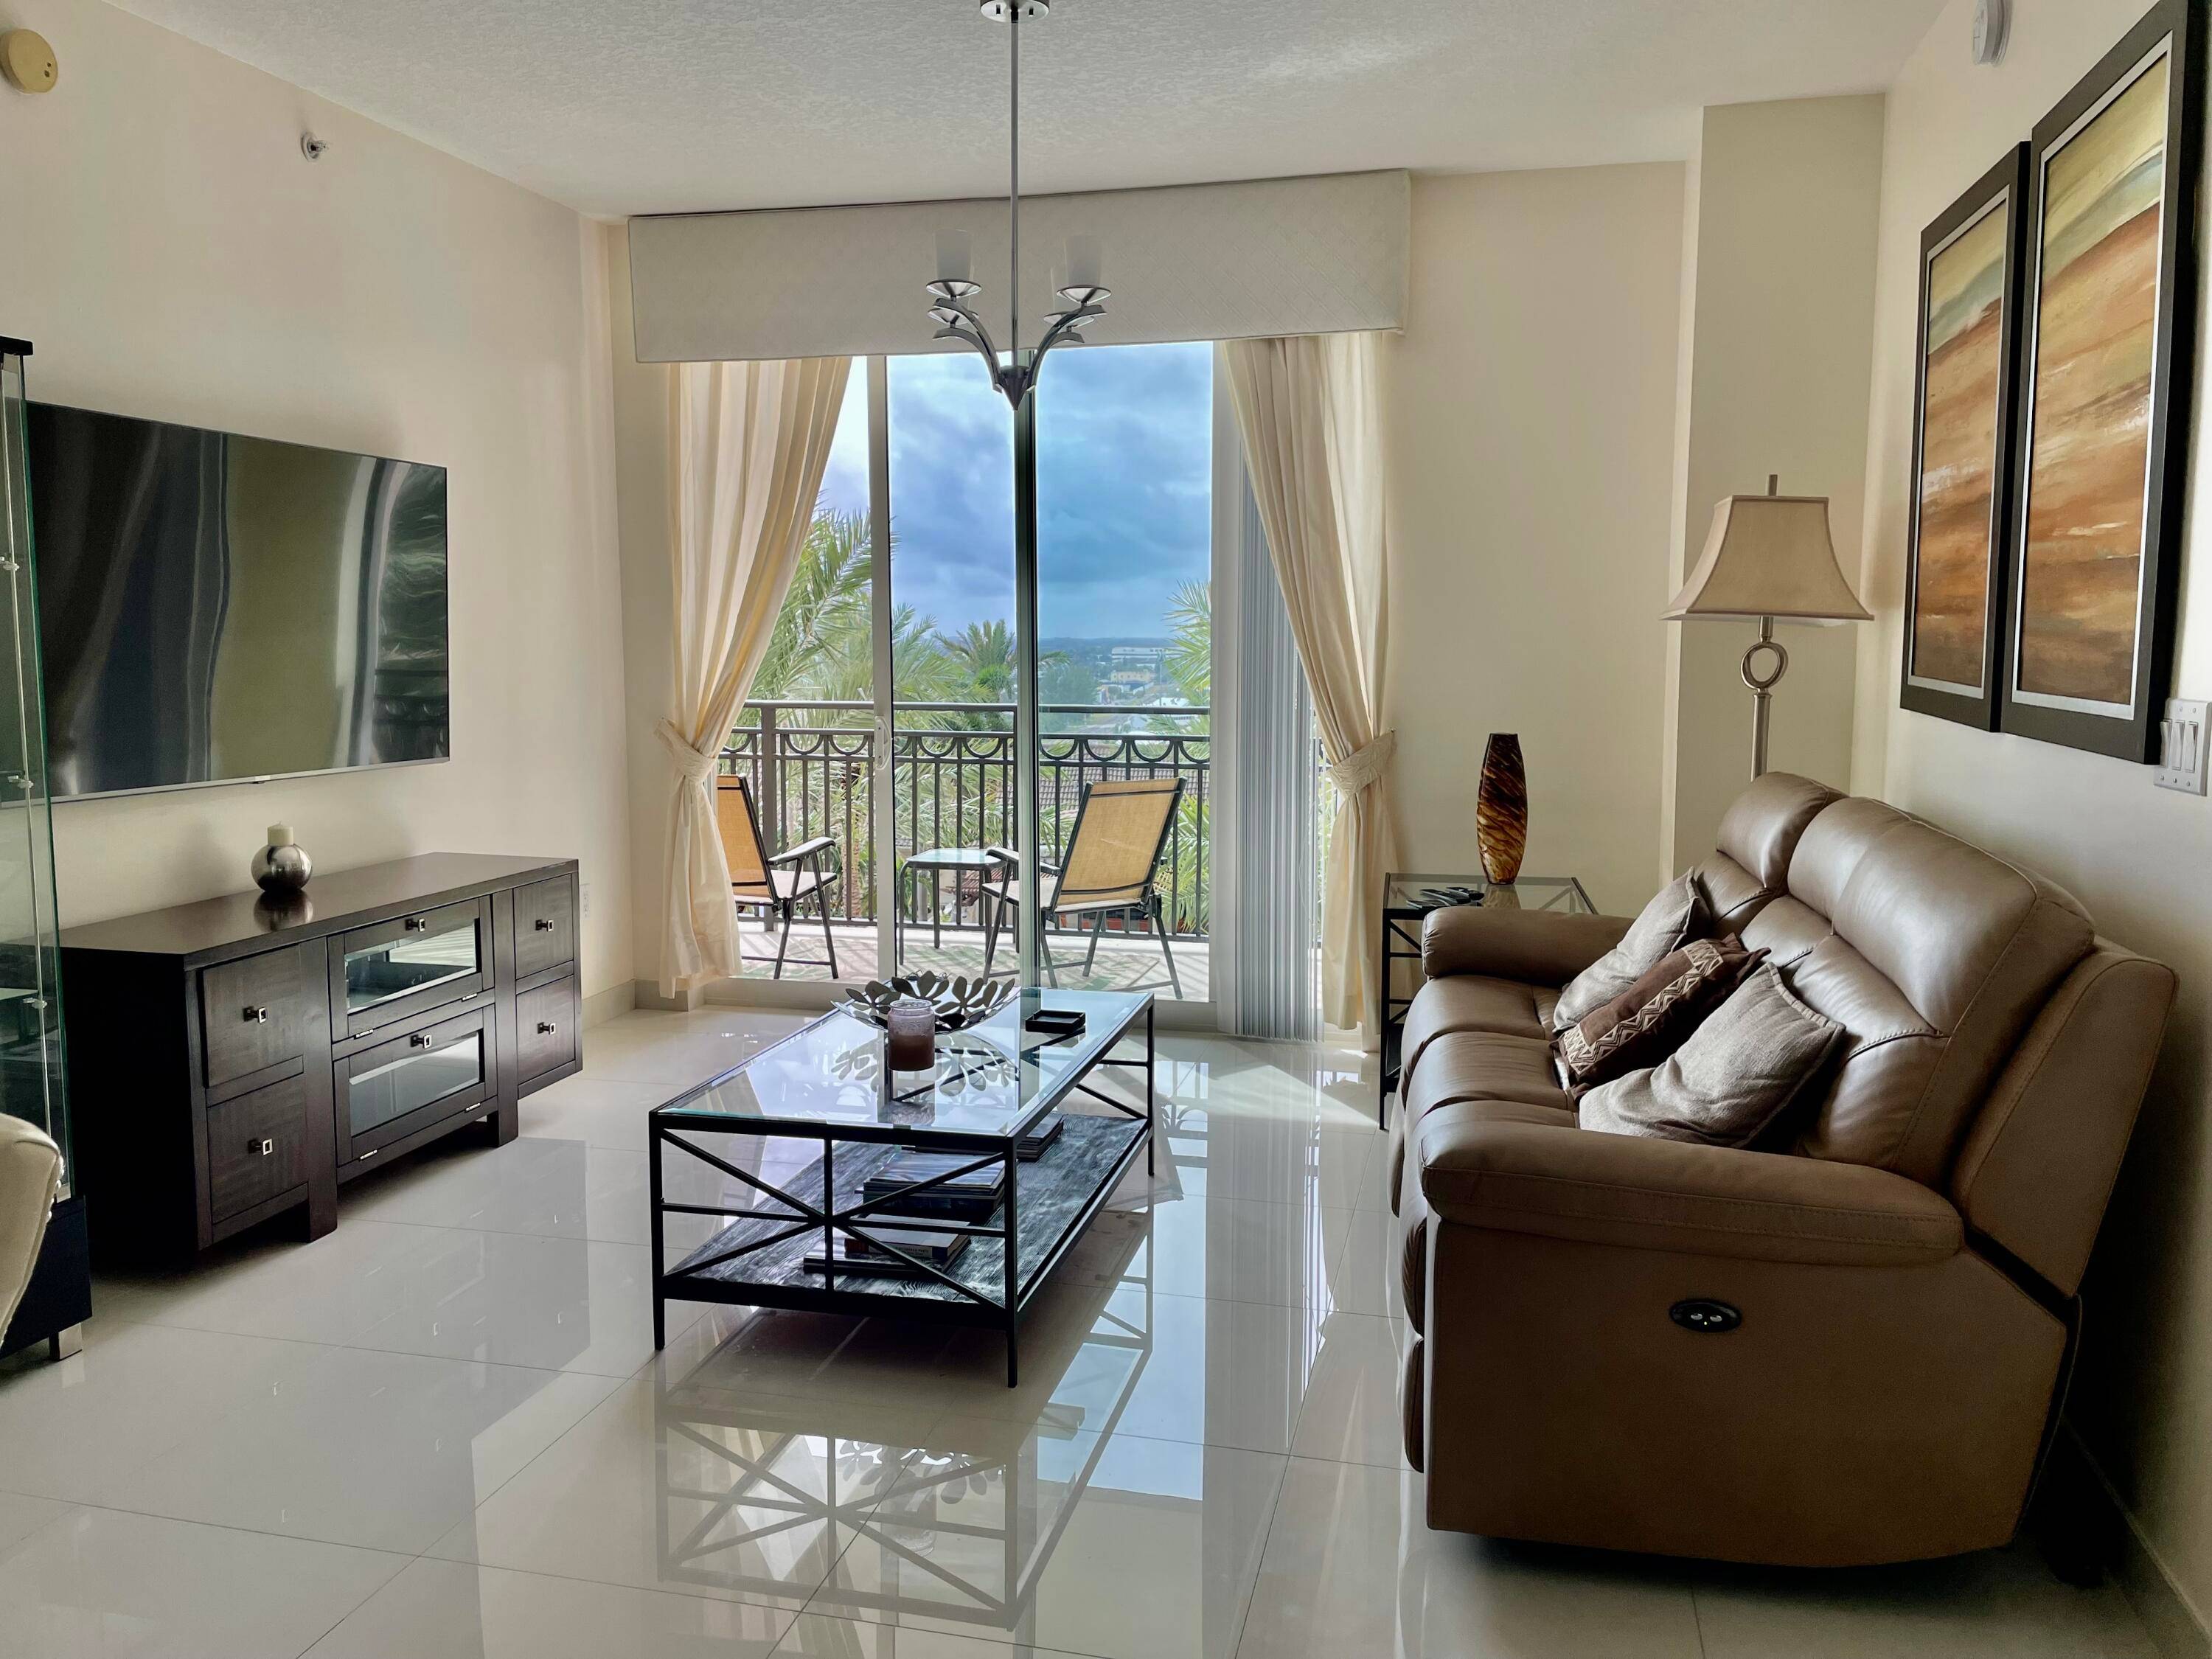 Luxury furnished Turnkey 2 bedroom, 2 bath beautiful condo in the heart of Downtown West Palm Beach for an Annual Rental.